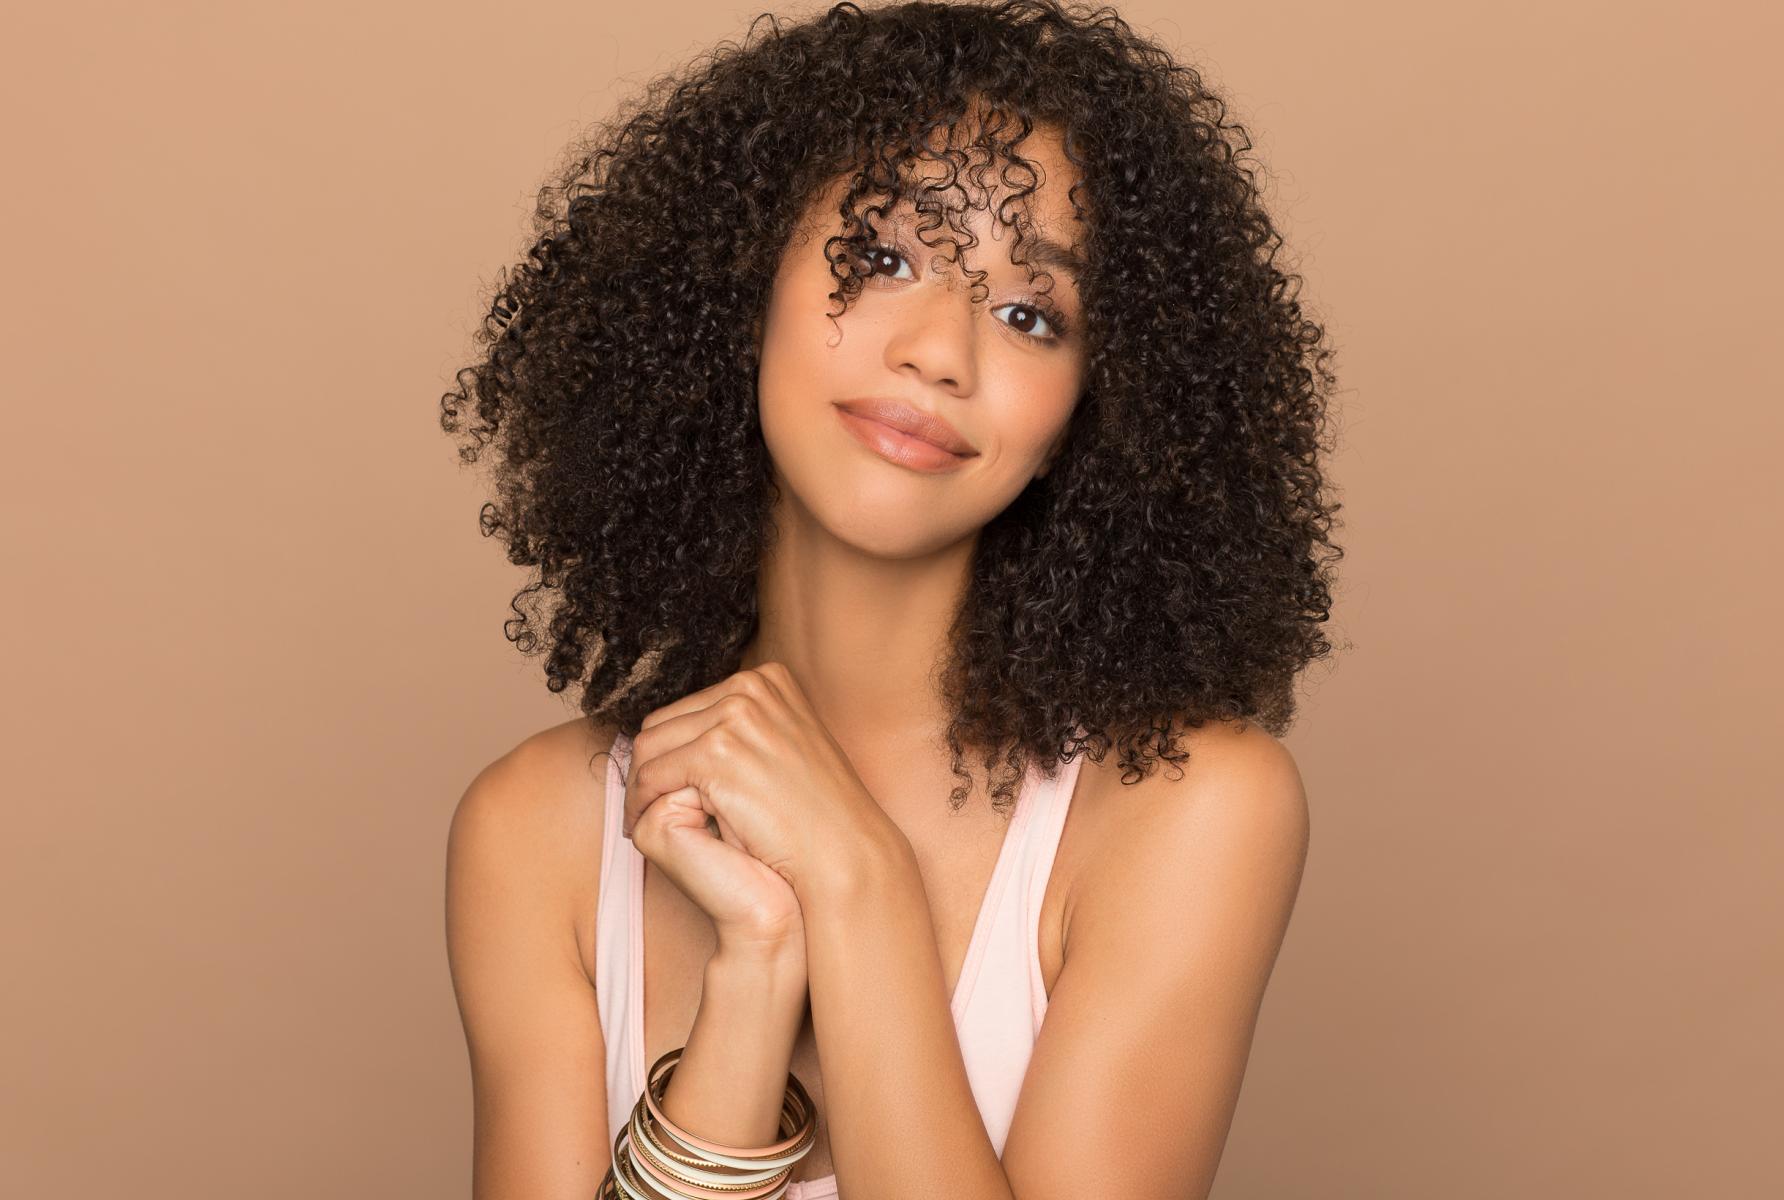 Jasmin Savoy Brown (For the People)